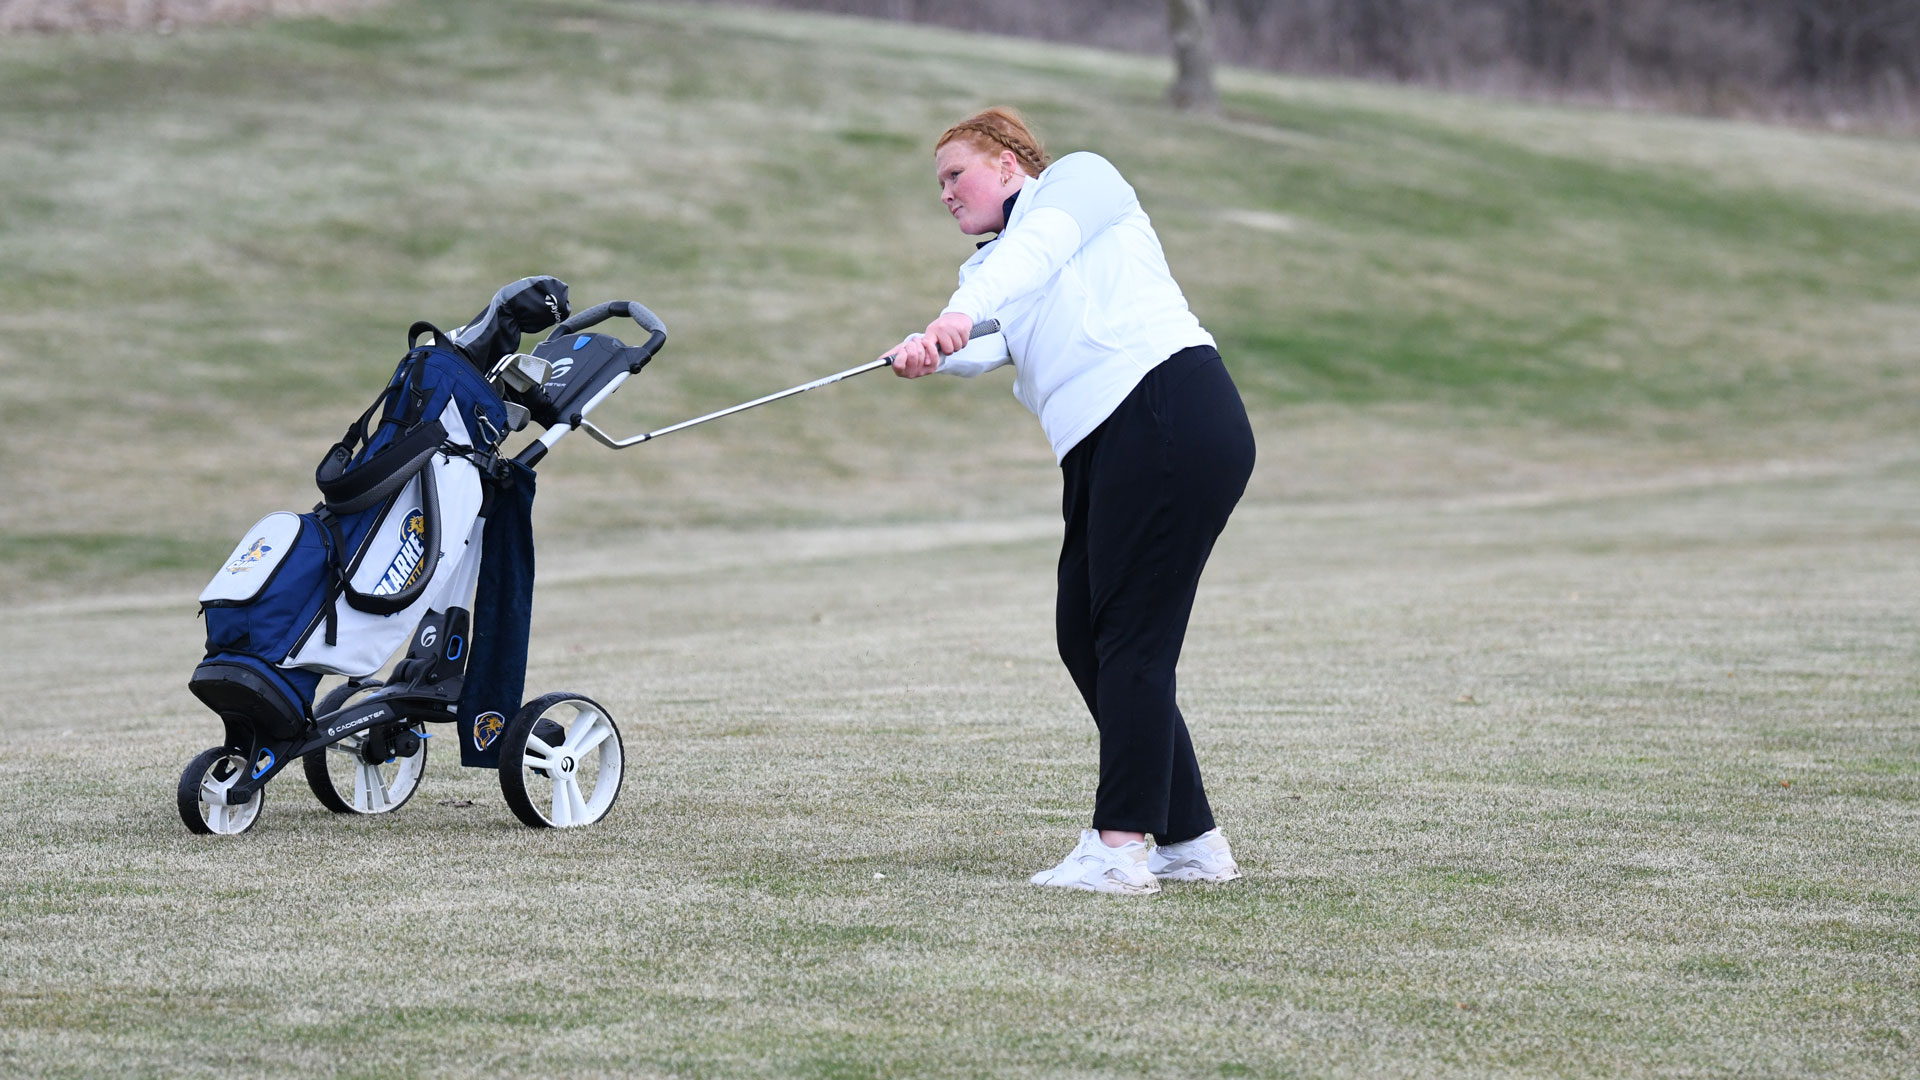 Pride women's golf closes out their final regular season tournament at UW-Whitewater